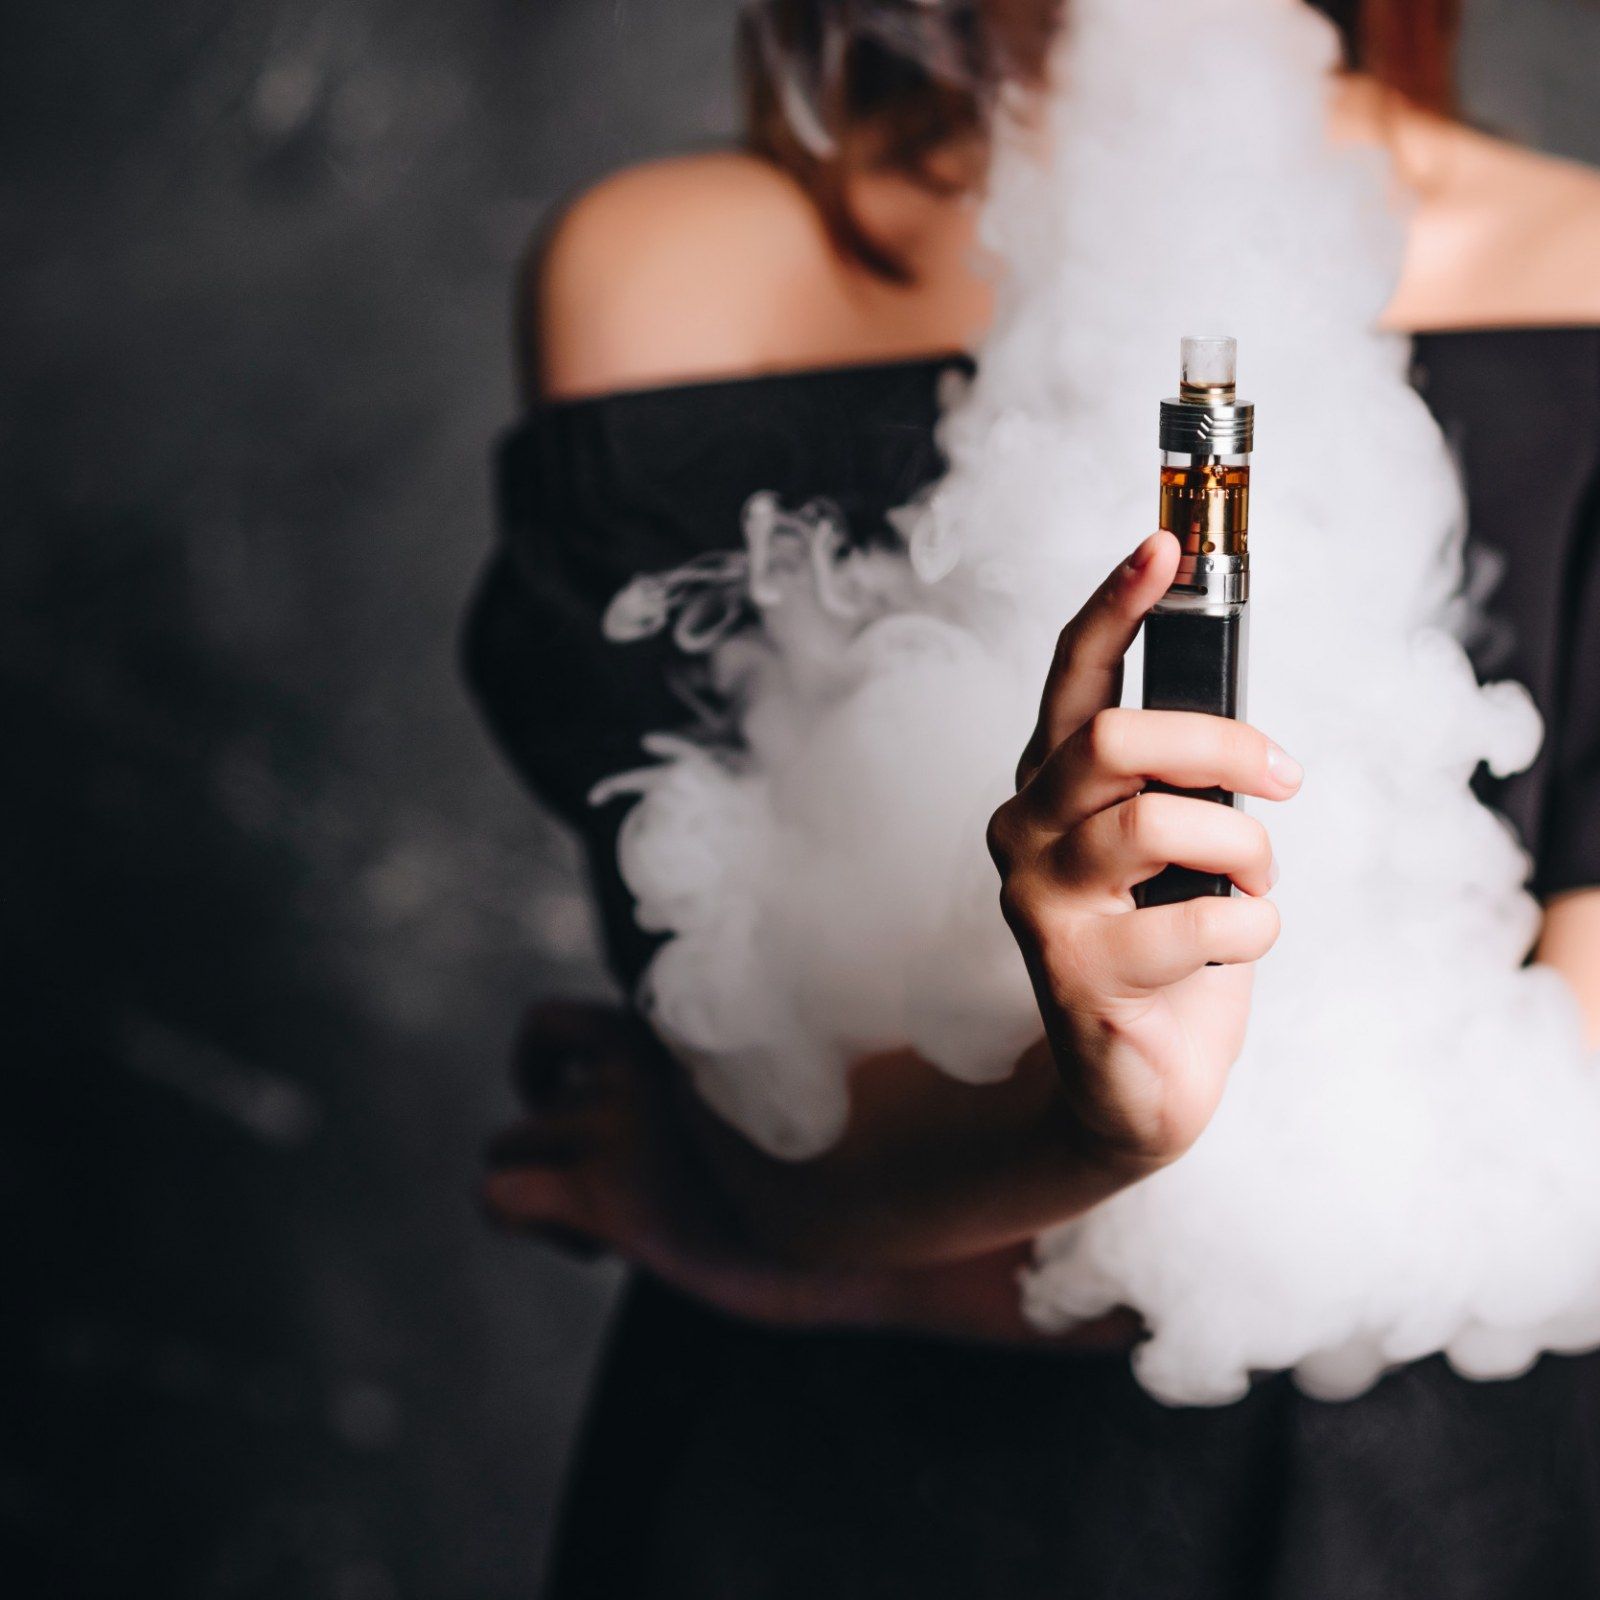 Vaping From Flavored E Cigarettes May Worsen Asthma, Study Suggests